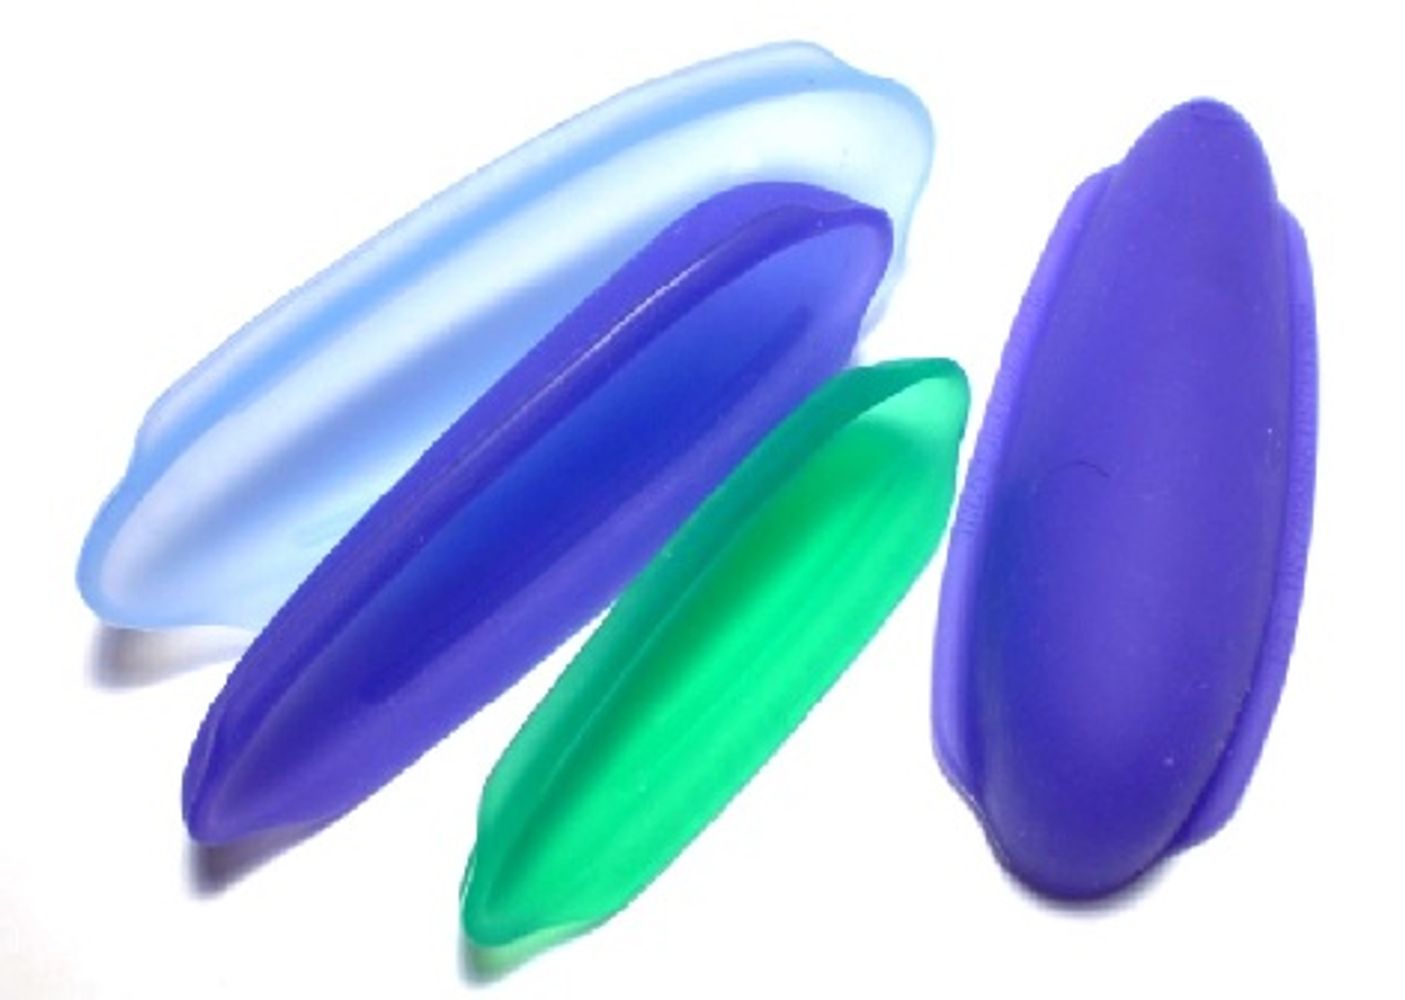 Vcovers,  Vaginal cover worn for bikini hair removal and spray tanning.